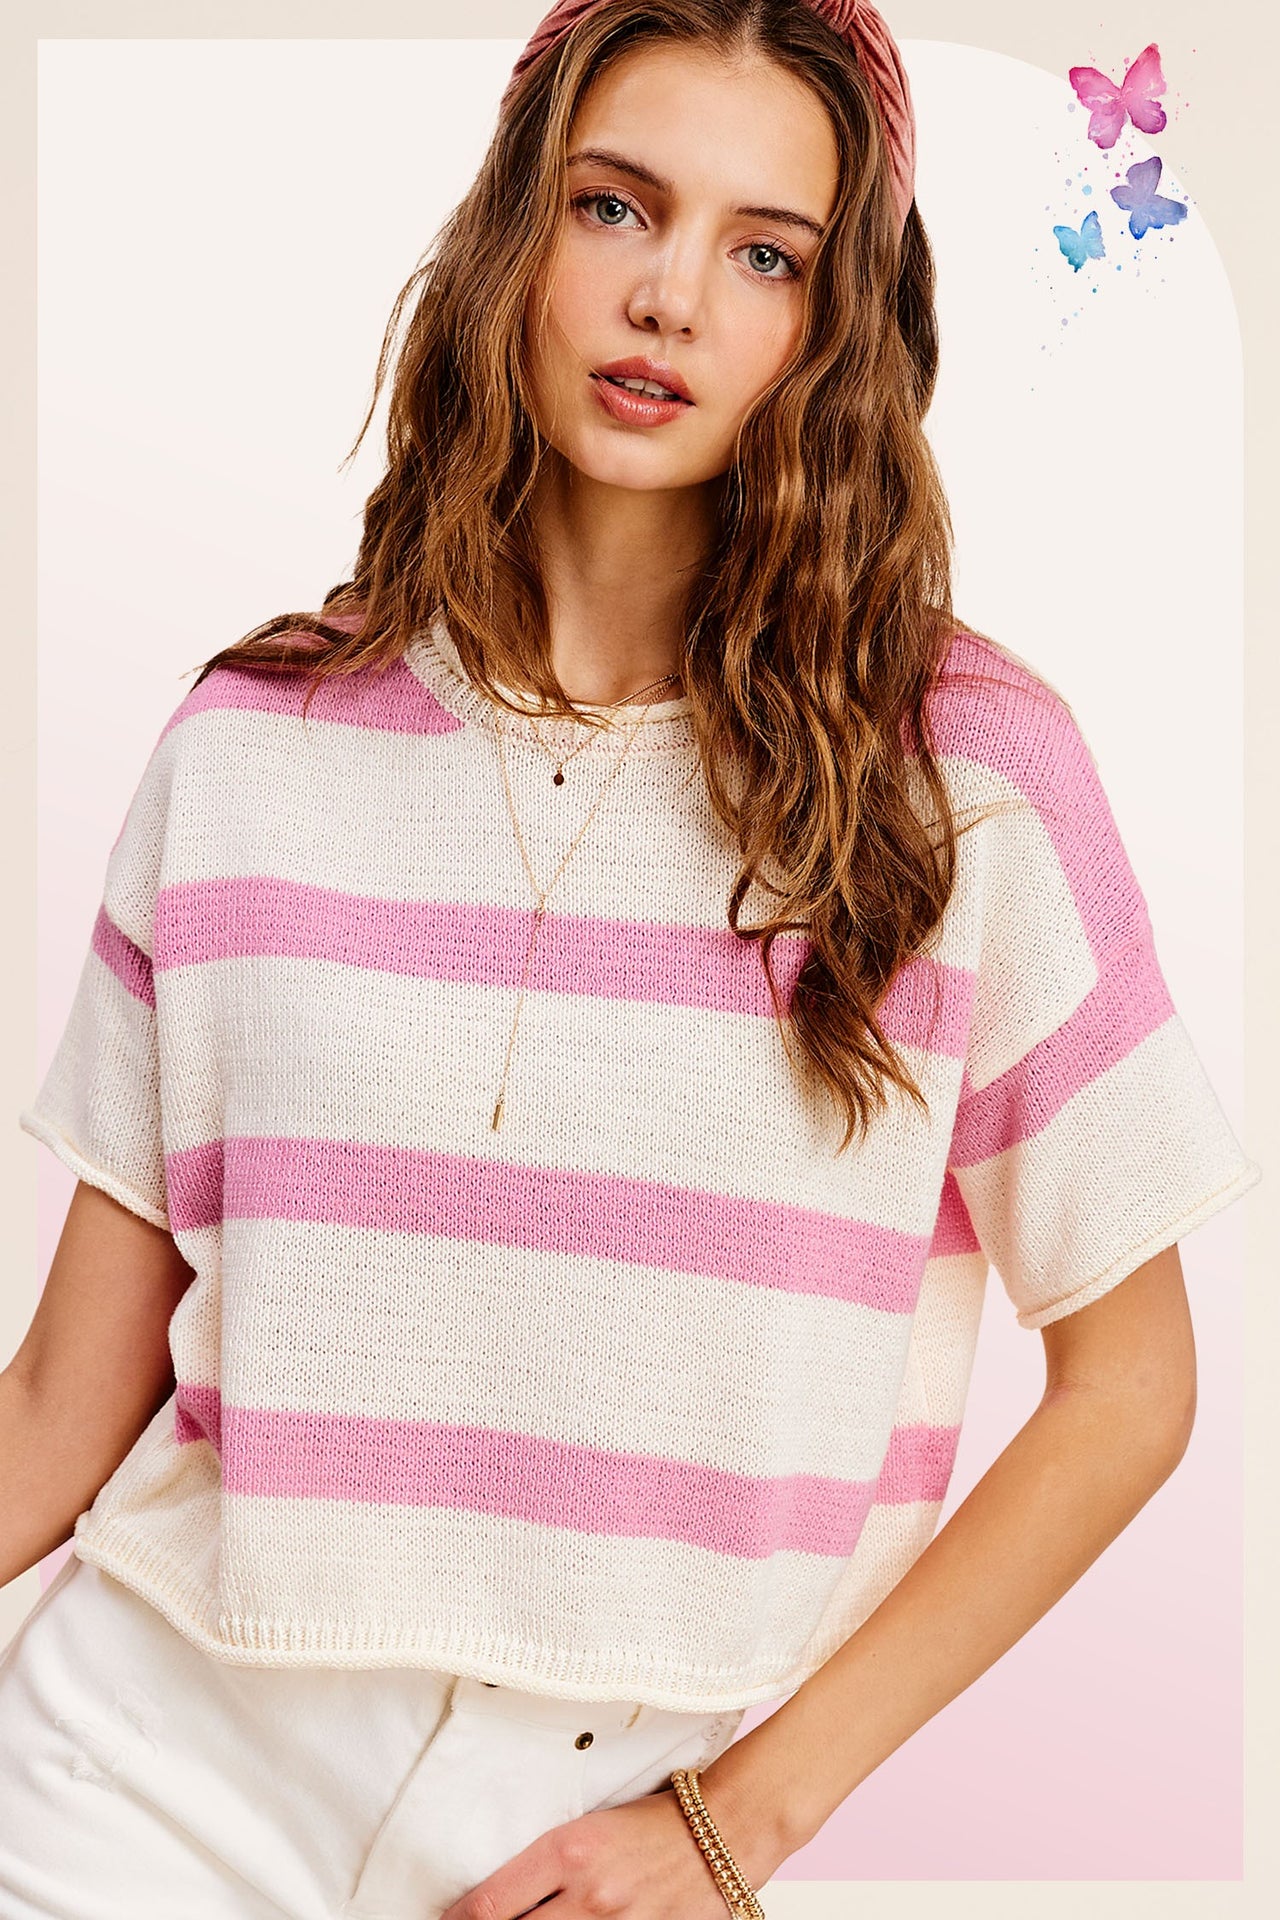 The Mandy Sweater Top